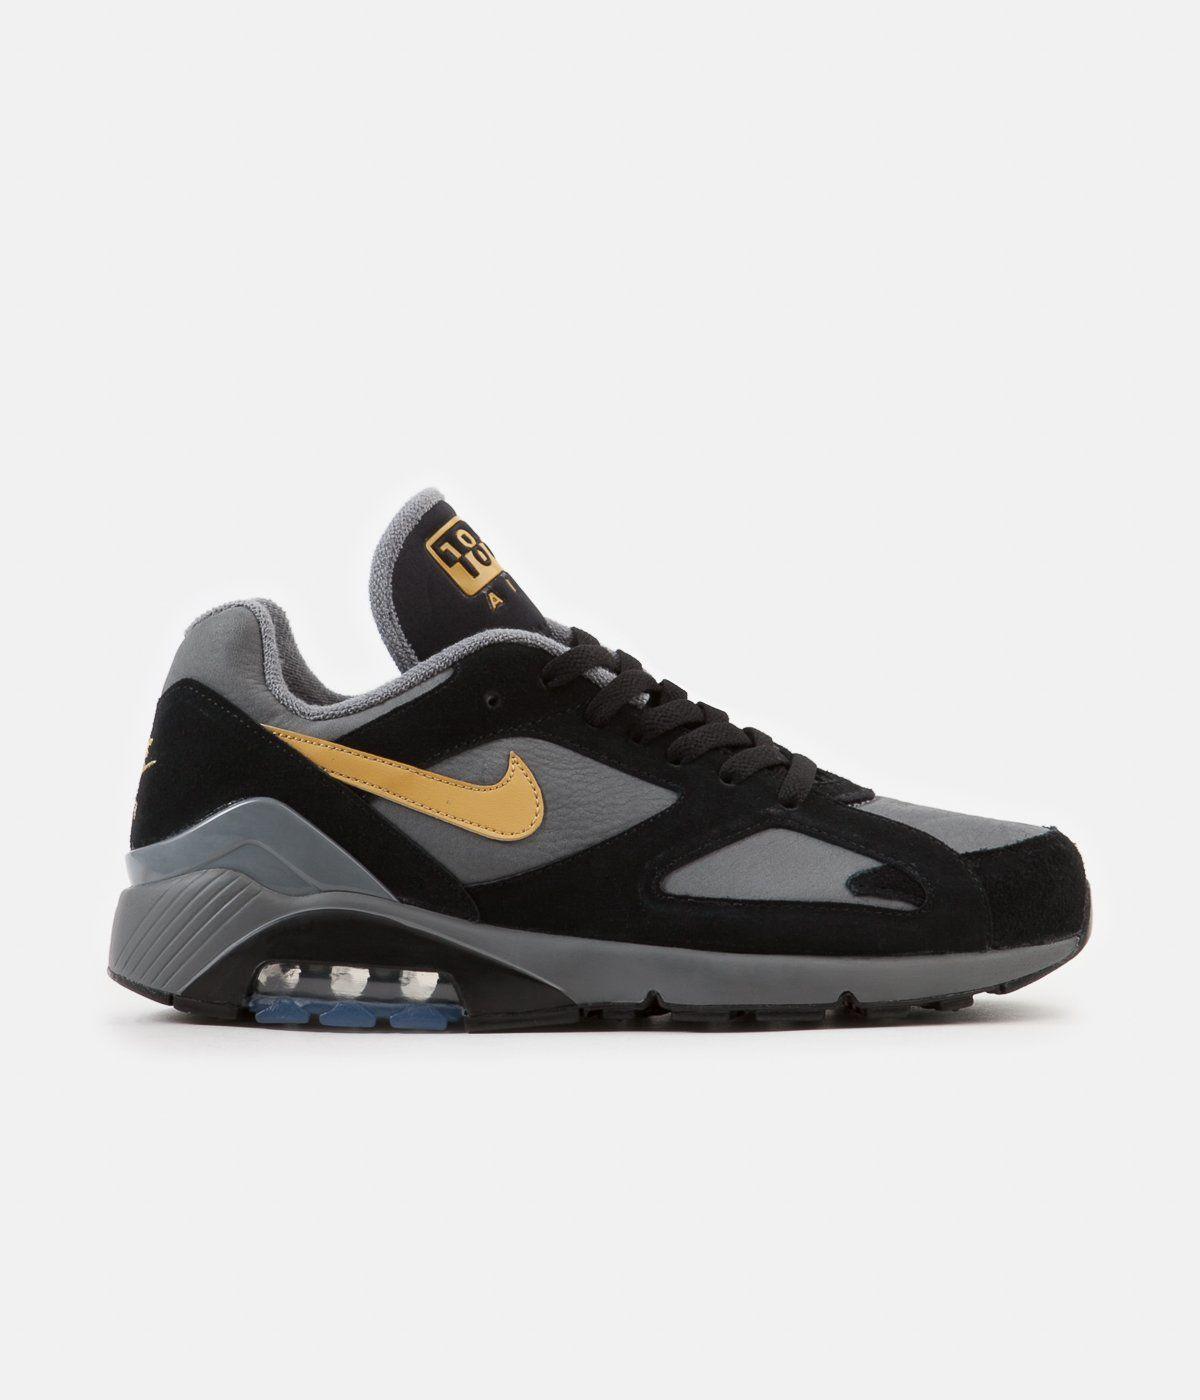 Wheat Black and Gold Logo - Nike Air Max 180 Shoes Grey / Wheat Gold